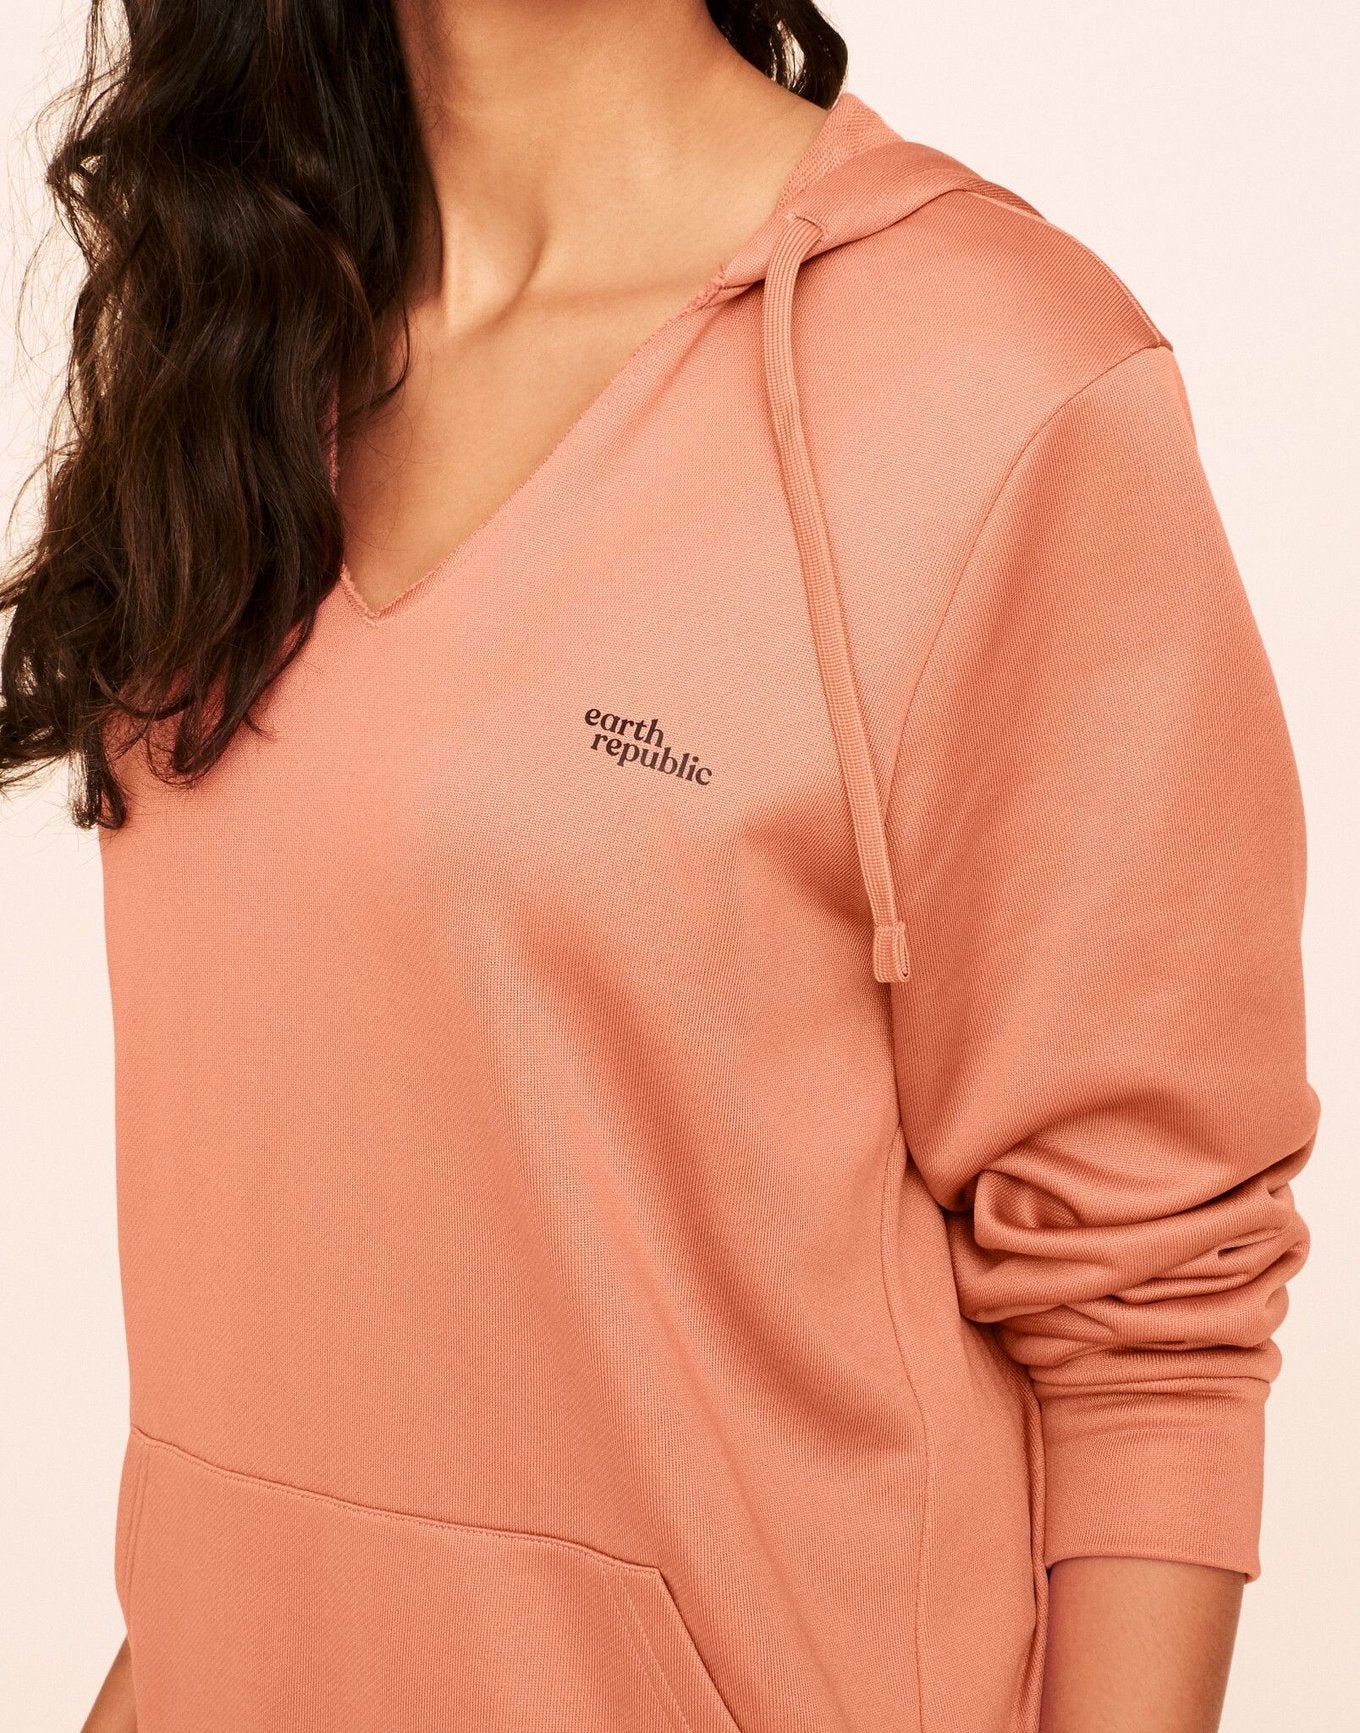 Earth Republic Faye Hooded Pullover Hoodie in color Rhododendron Marl and shape hoodie